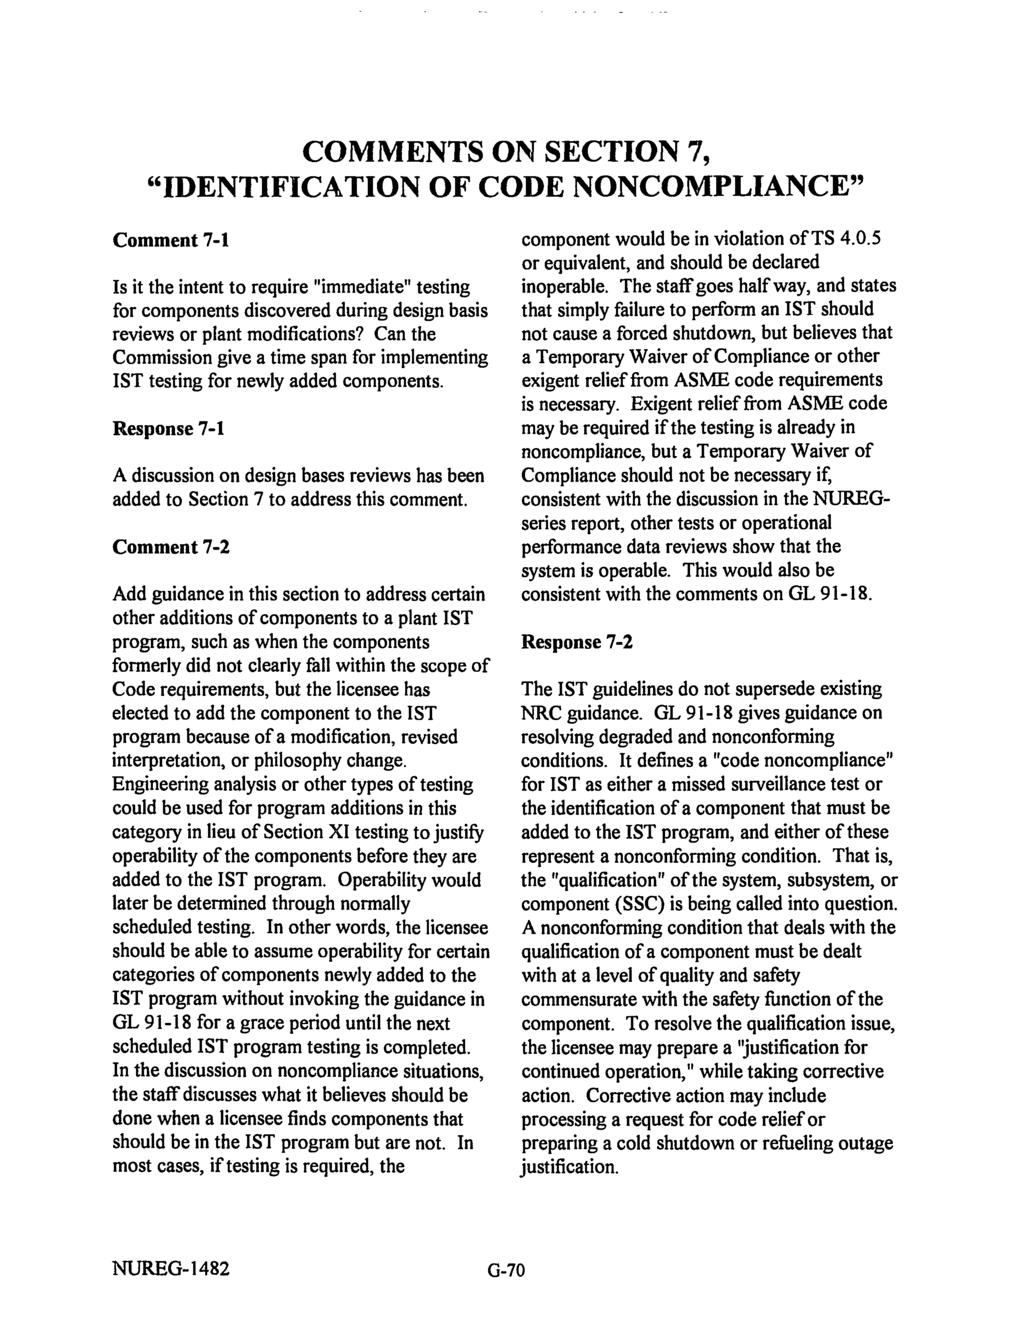 COMMENTS ON SECTION 7, IDENTIFICATION OF CODE NONCOMPLIANCE" Comment 7-1 Is it the intent to require "immediate" testing for components discovered during design basis reviews or plant modifications?